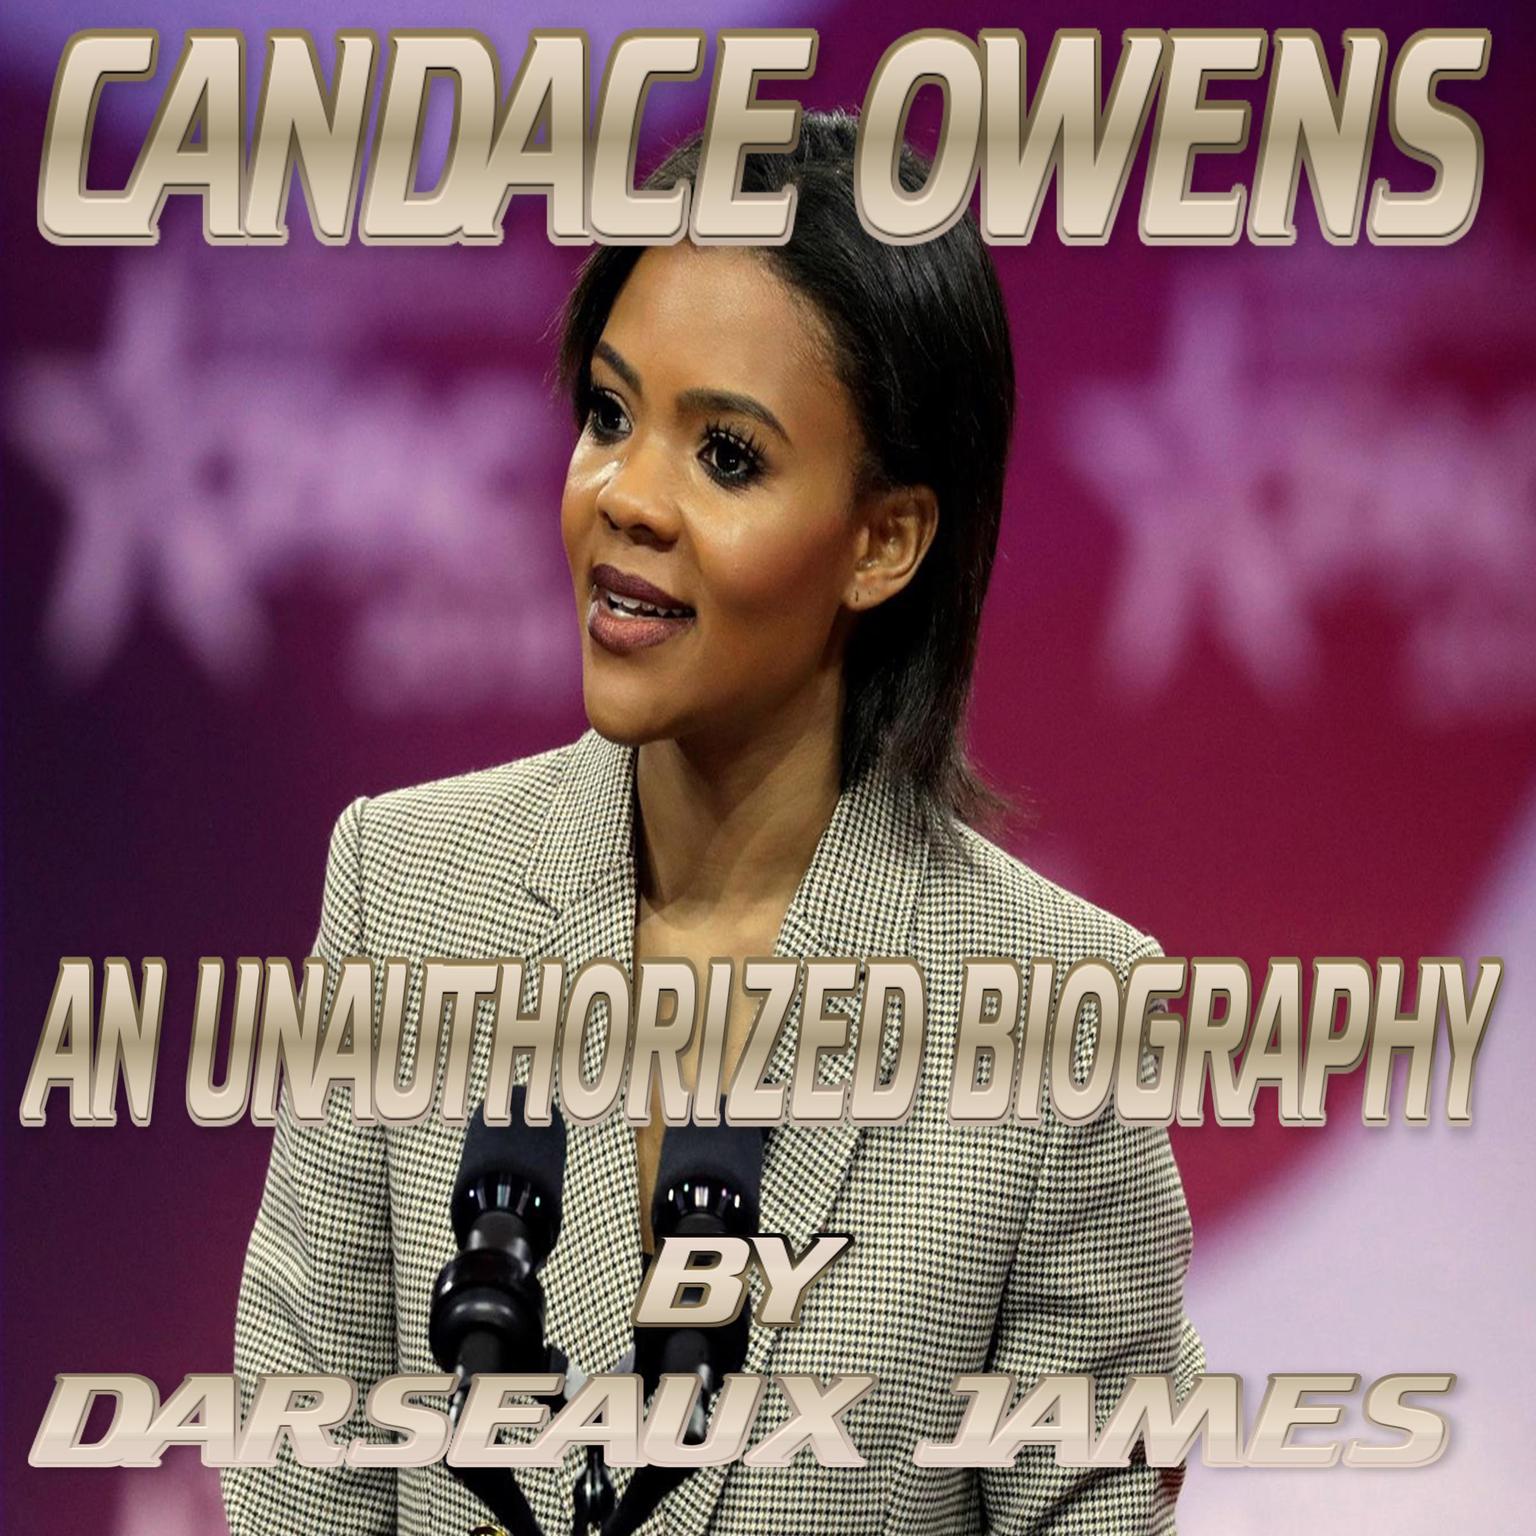 CANDACE OWENS : AN UNAUTHORIZED BIOGRAPHY Audiobook, by Darseaux James